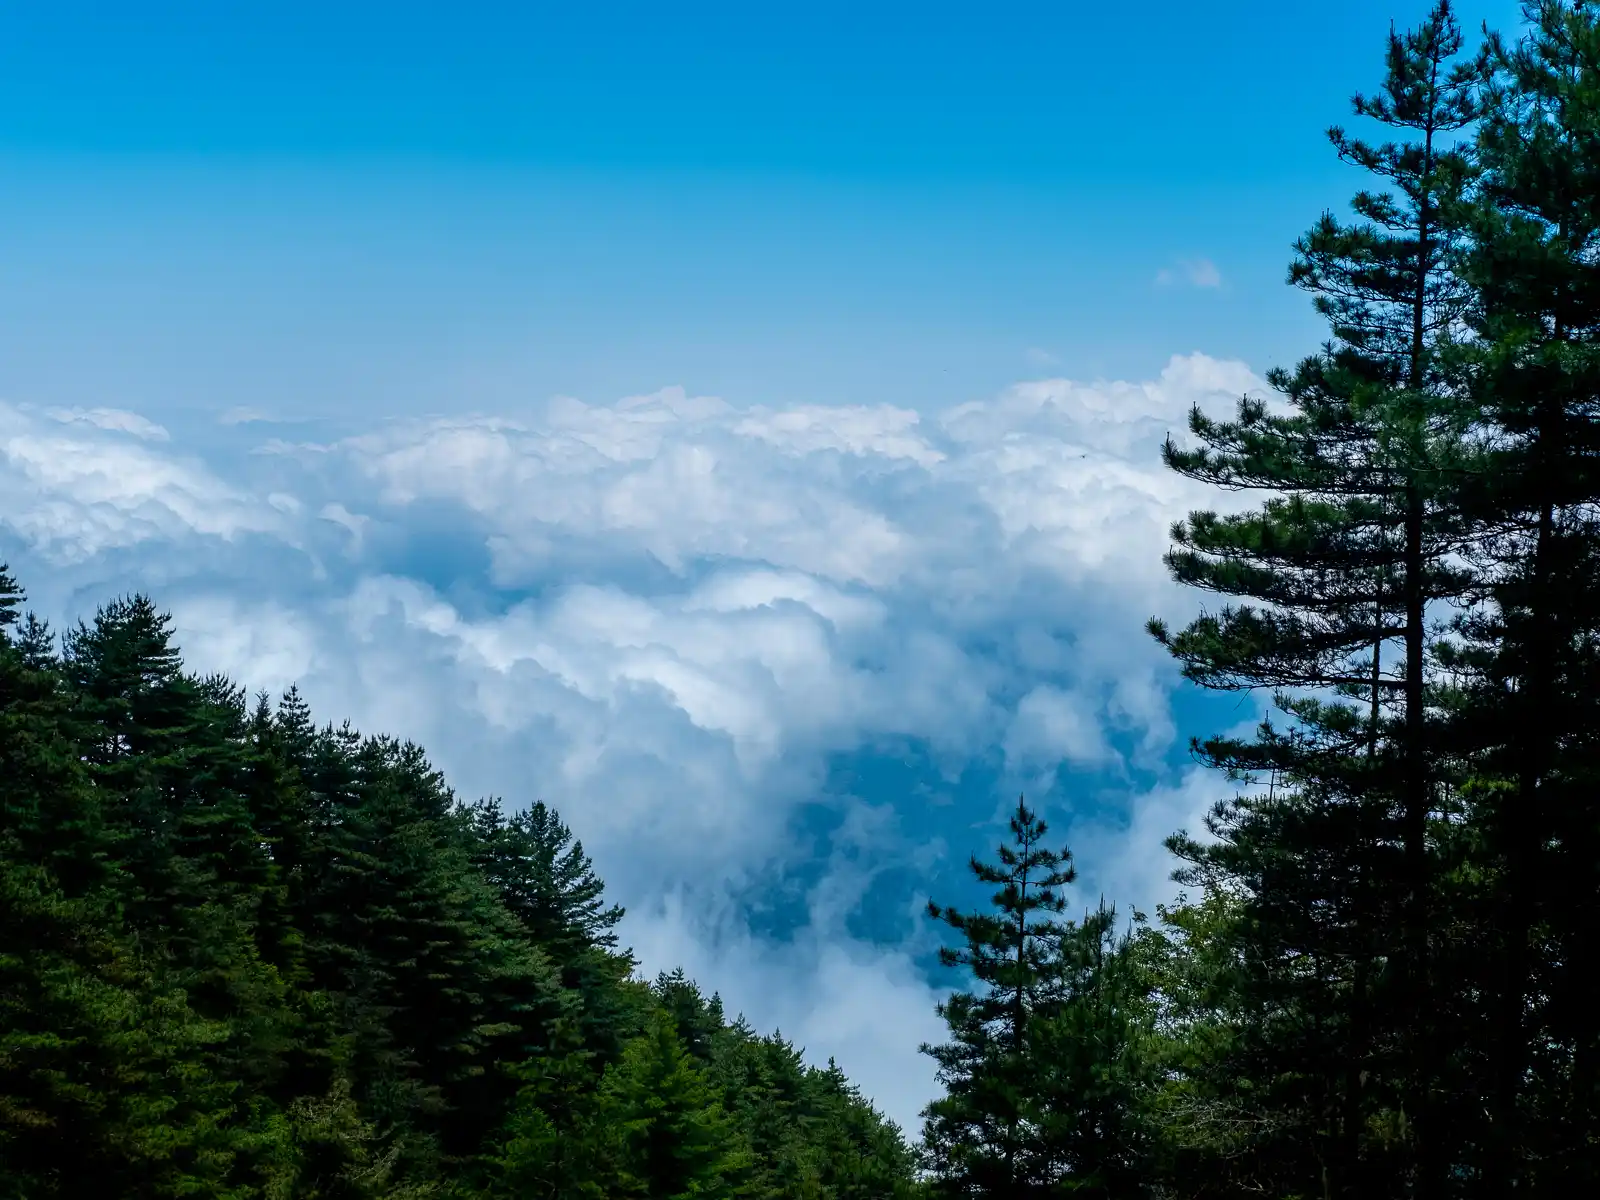 A sea of clouds below obscures the view between groves of trees.